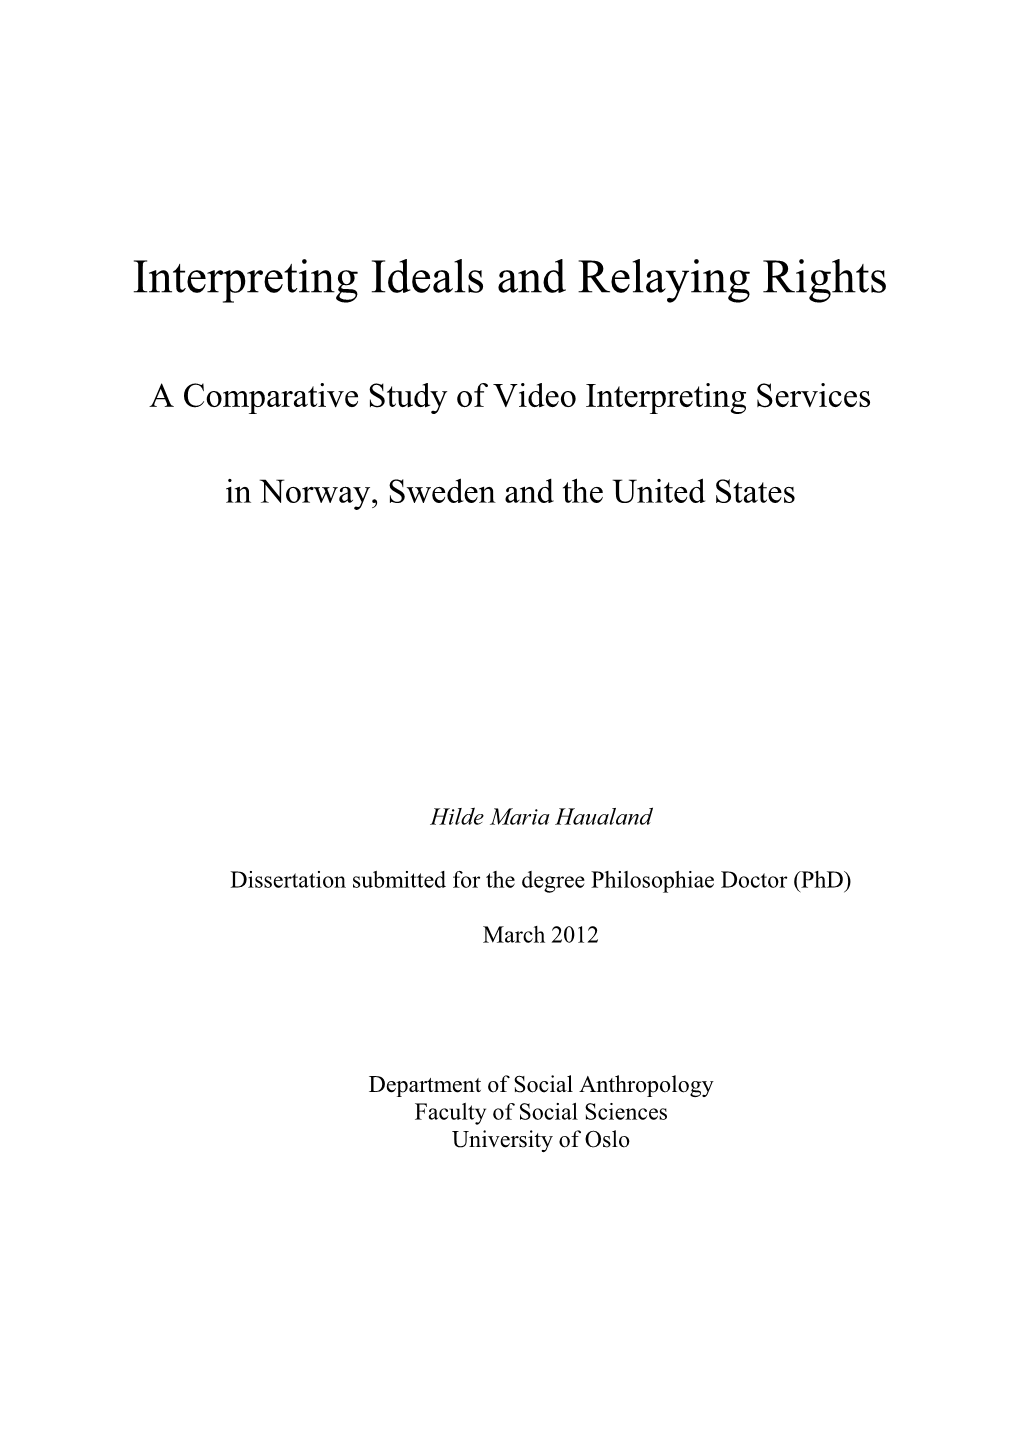 Interpreting Ideals and Relaying Rights